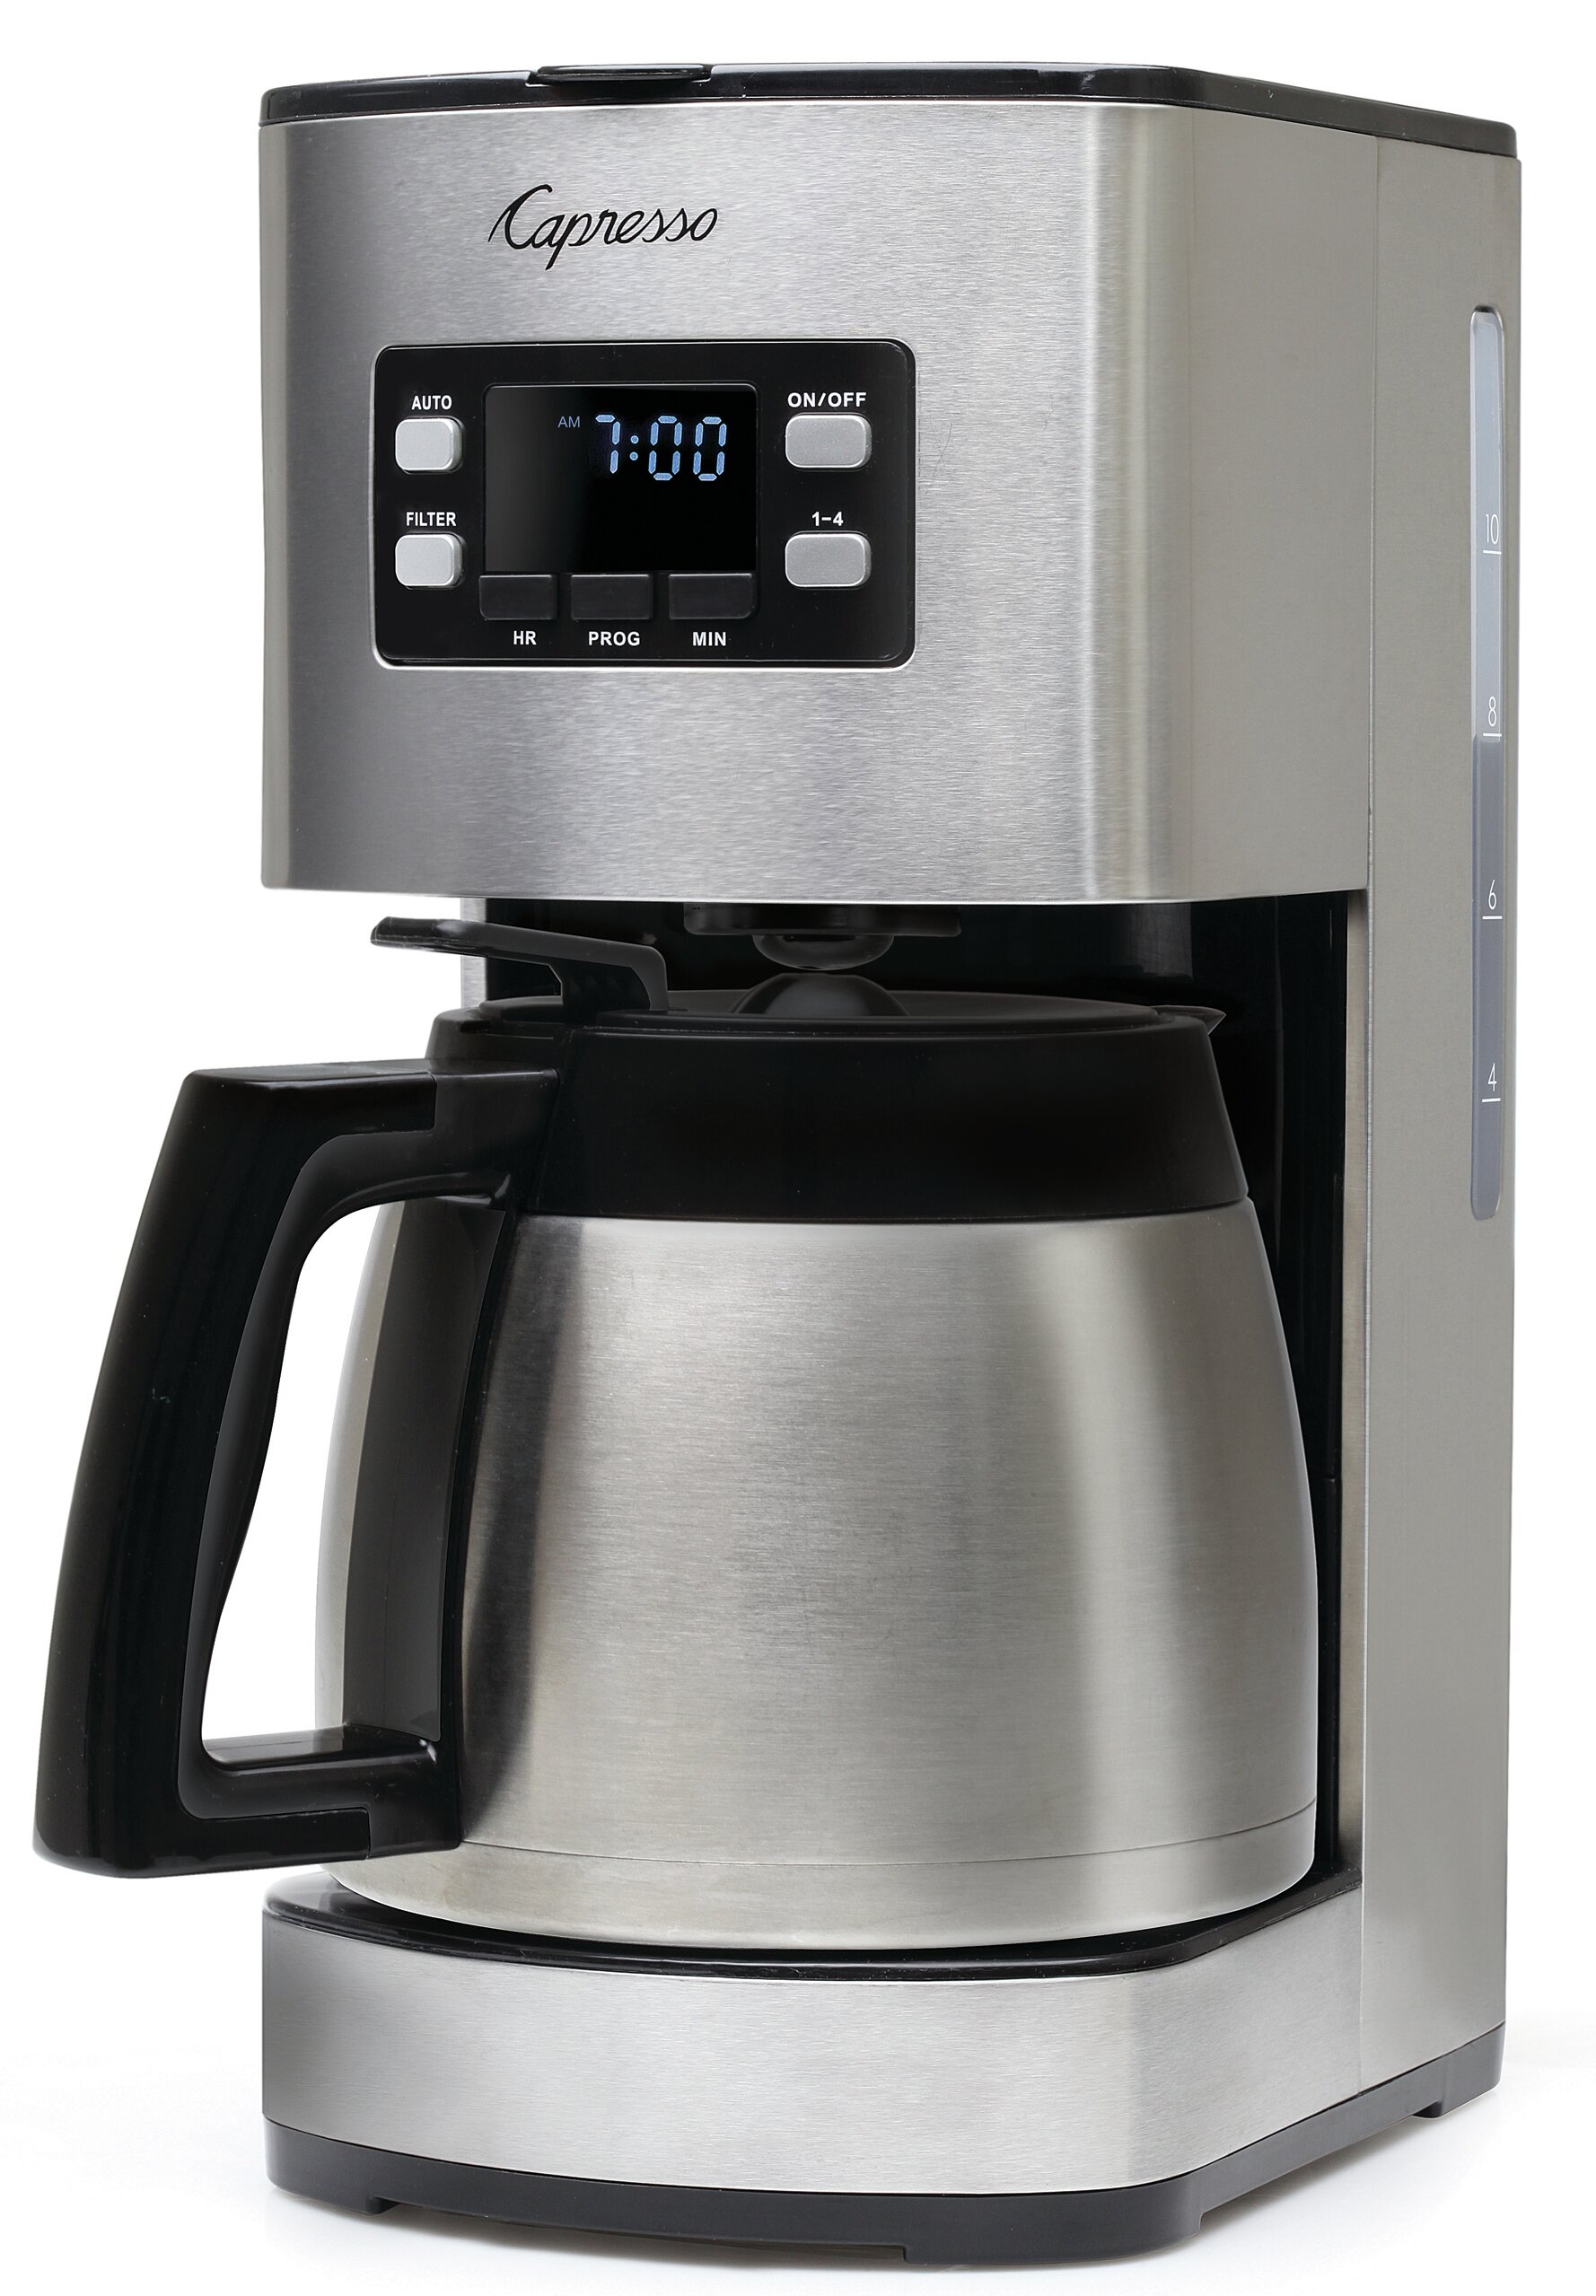 Capresso ST300 10-Cup Coffee Maker with Thermal Carafe & Reviews